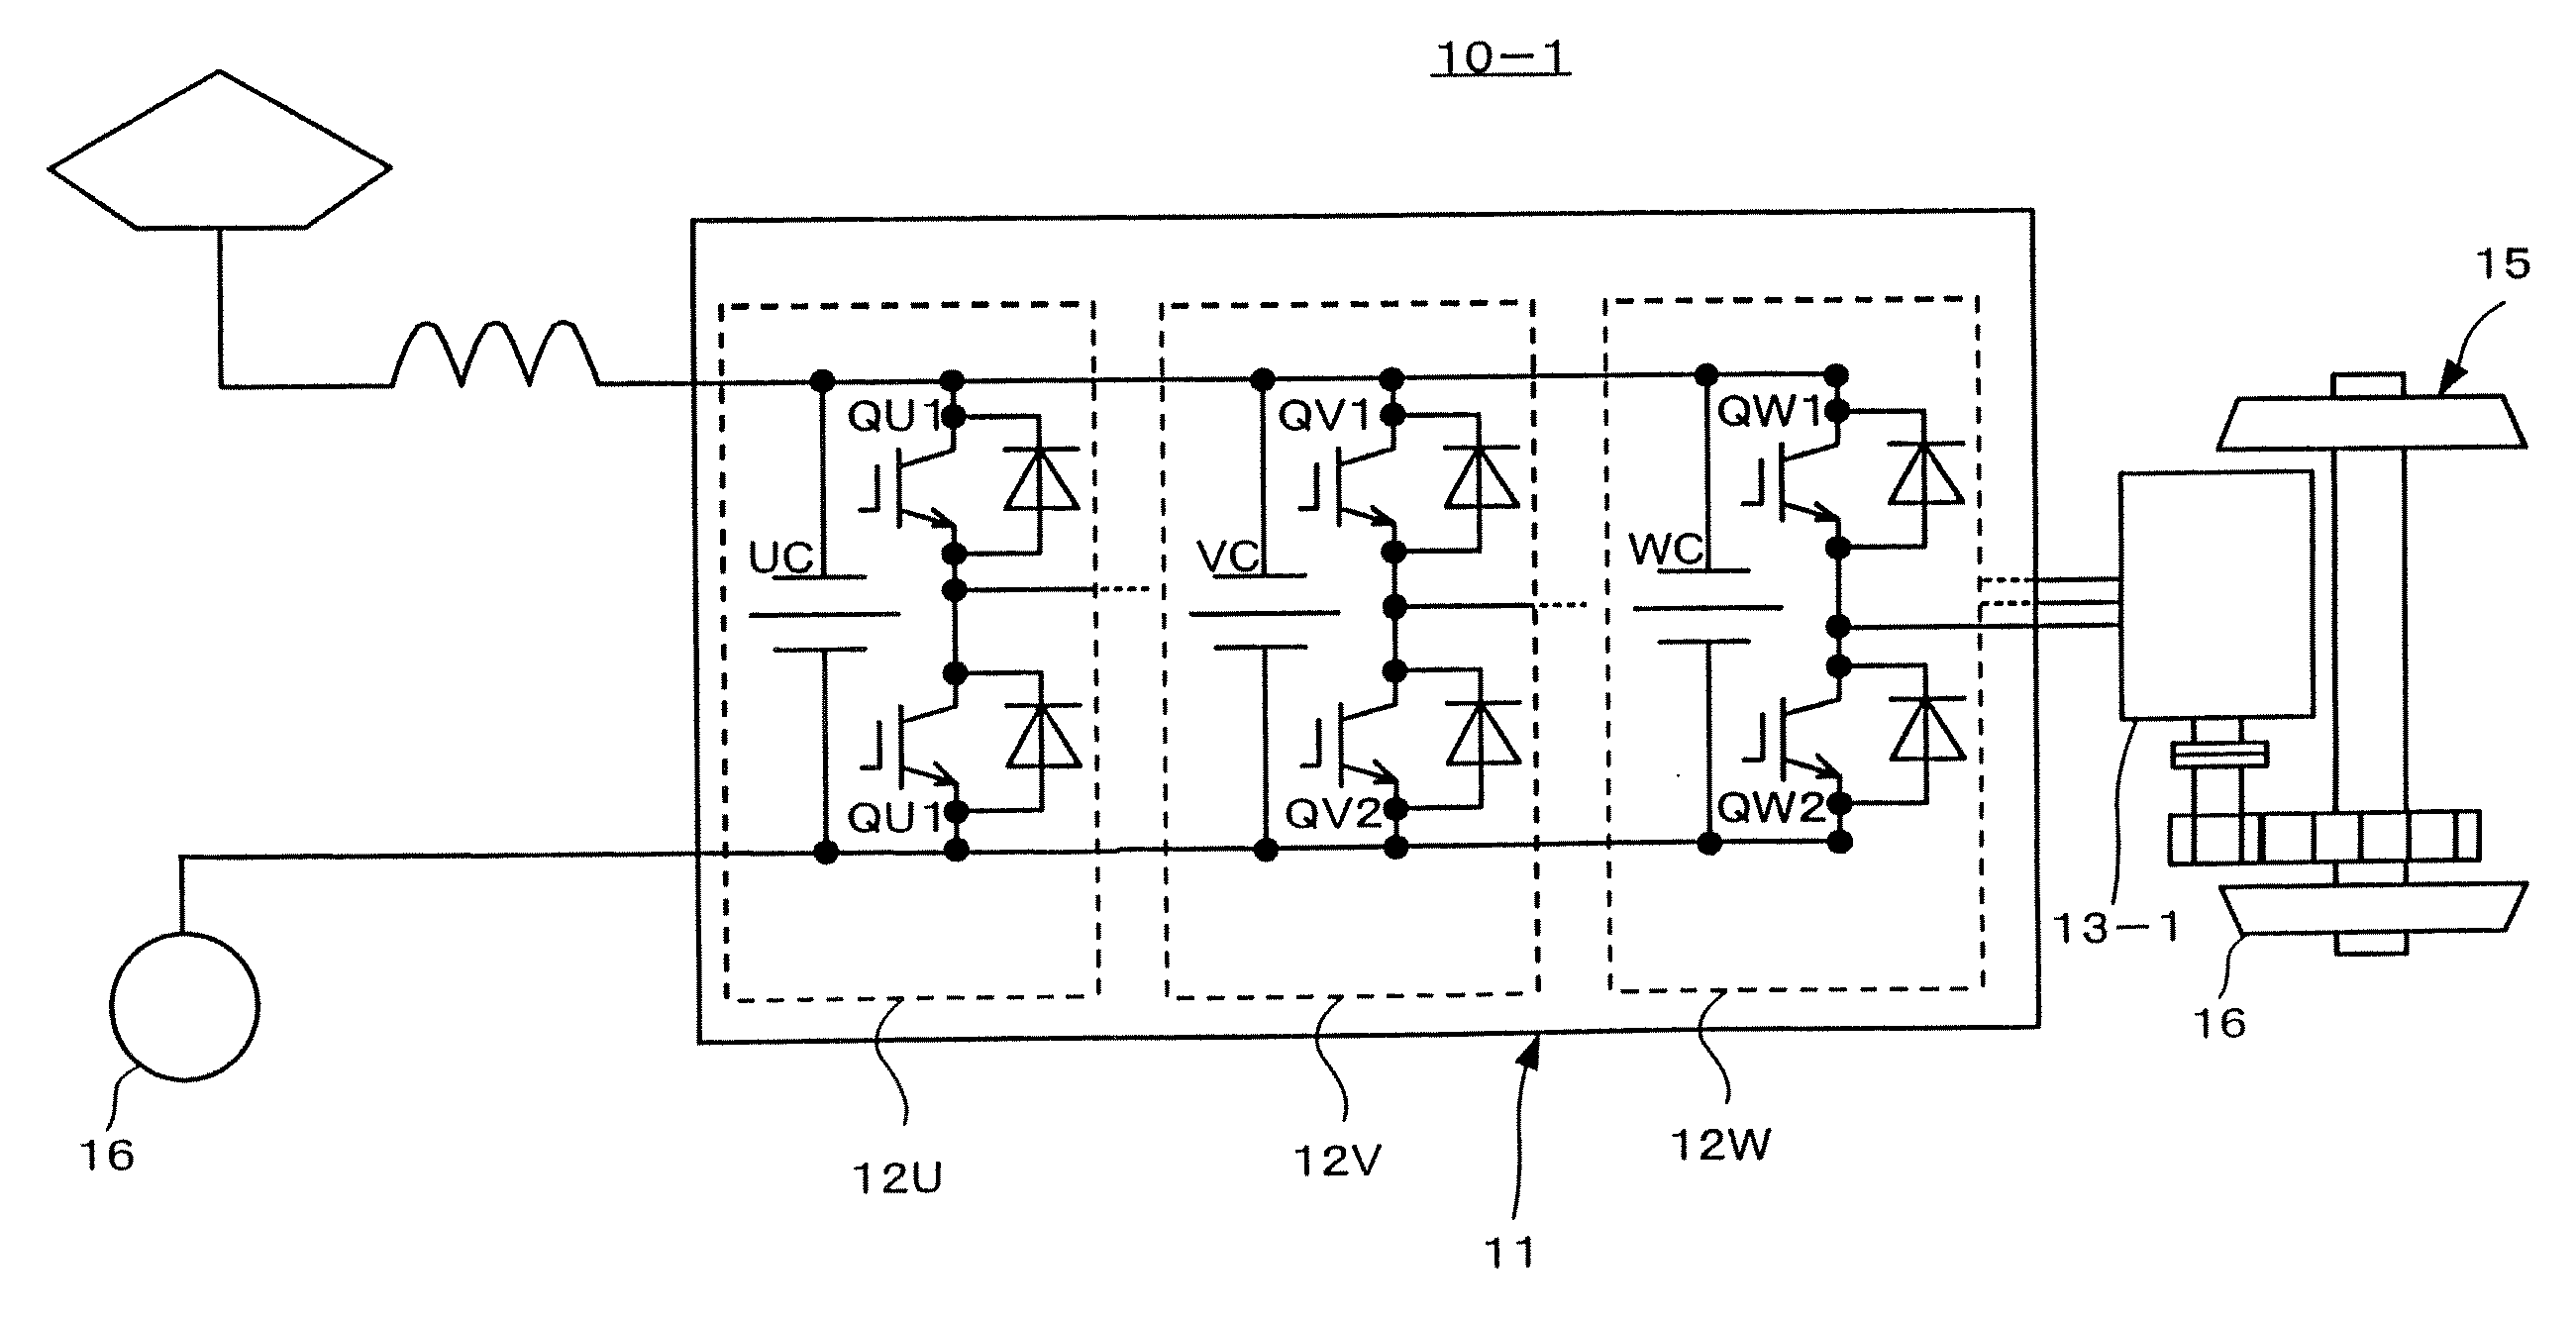 Motor drive system for railway vehicle